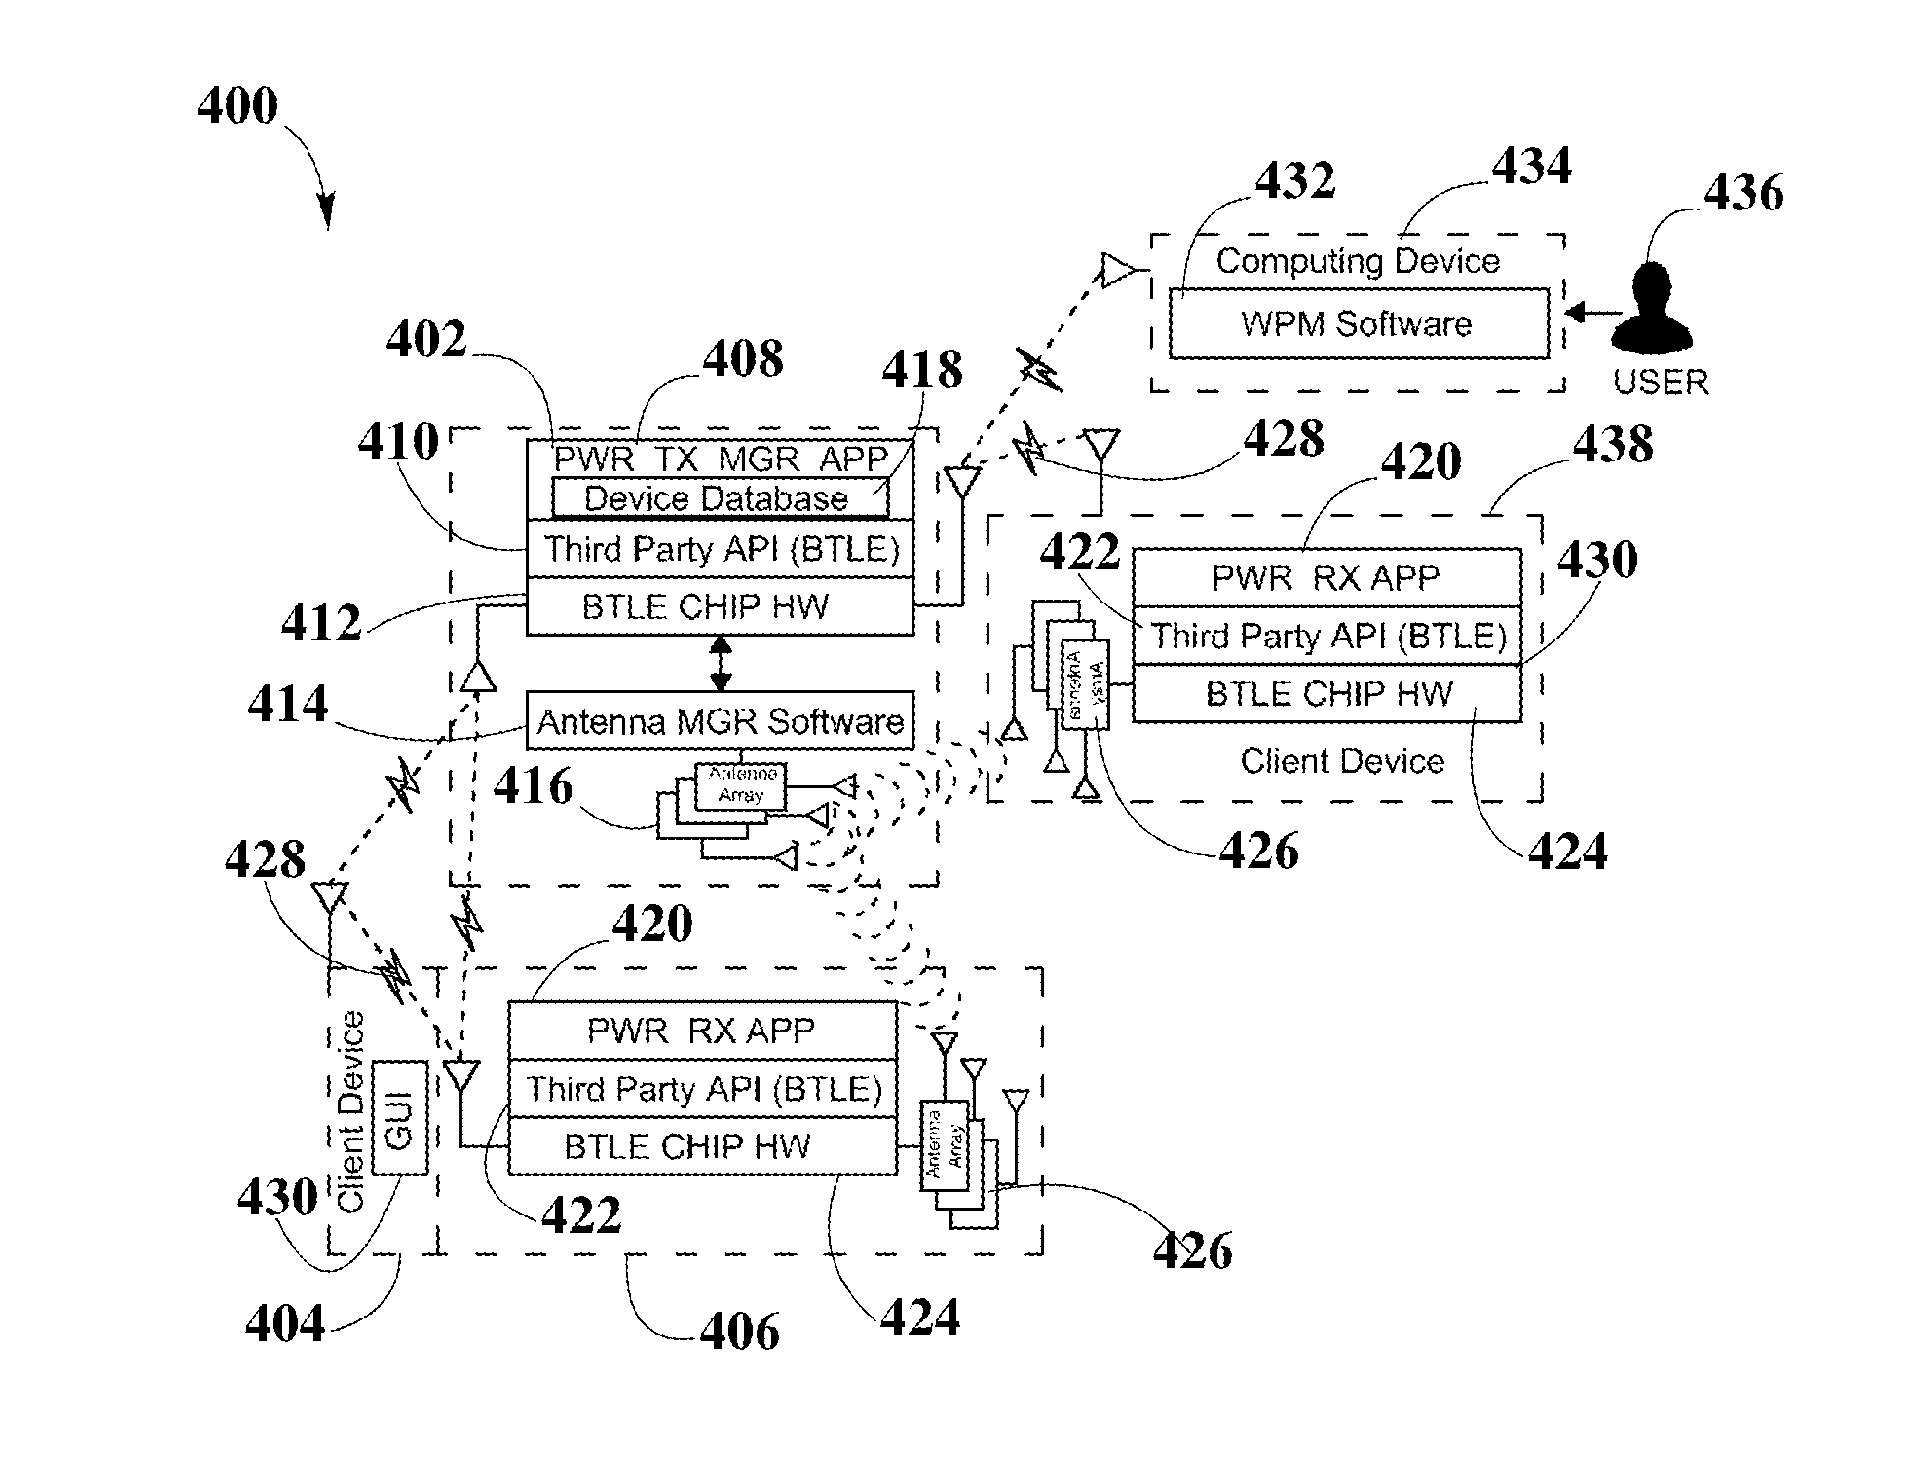 System and Method for Enabling Automatic Charging Schedules in a Wireless Power Network to One or More Devices